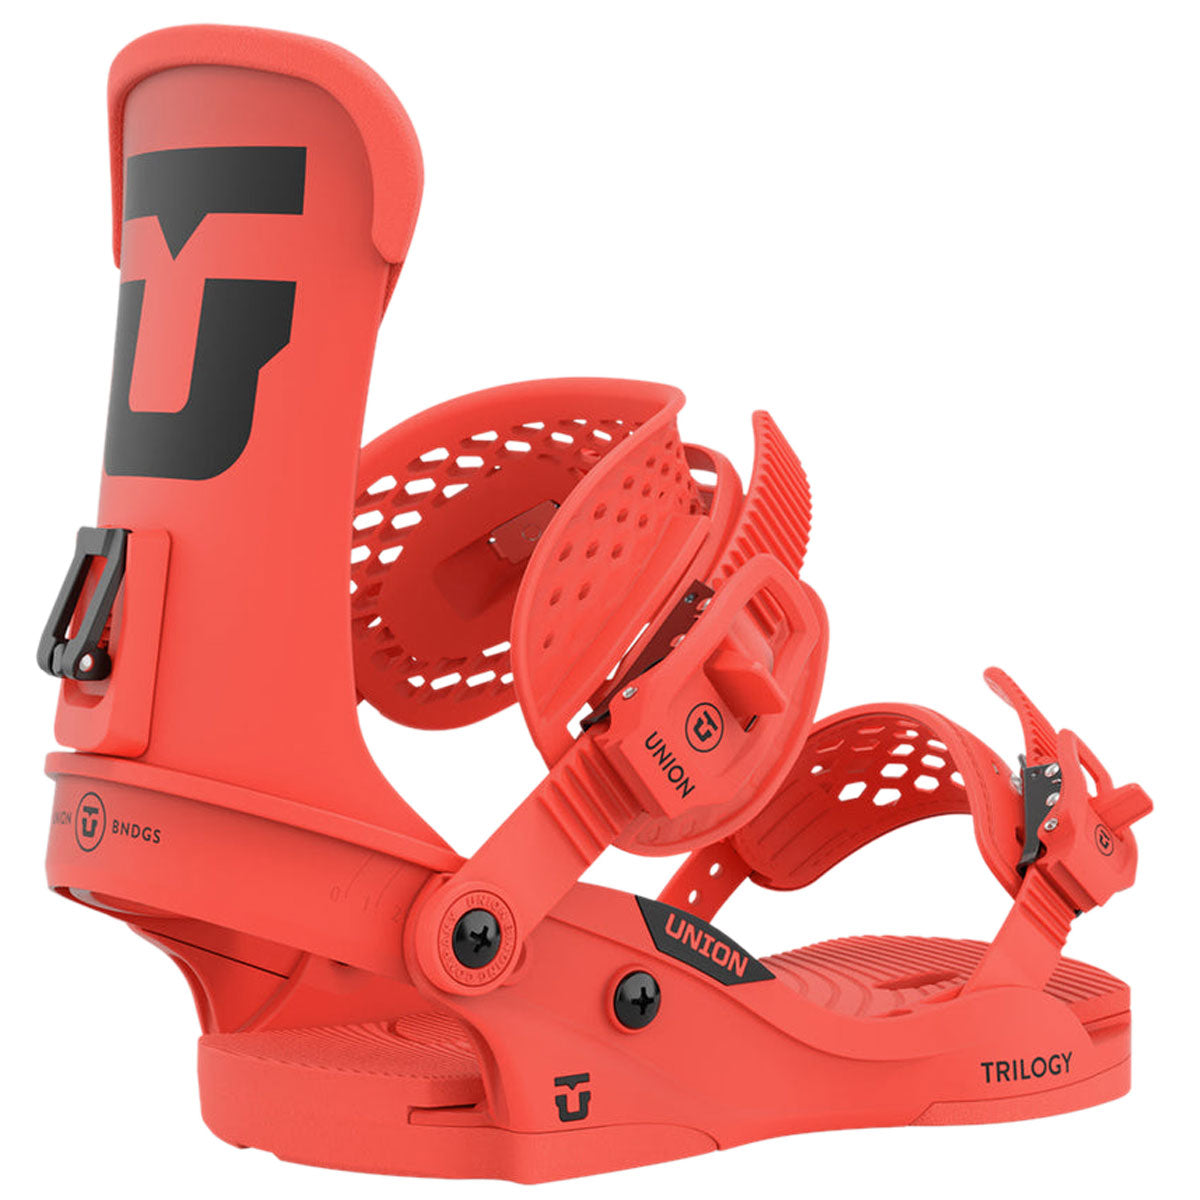 Union Womens Trilogy 2023 Snowboard Bindings - Coral image 1